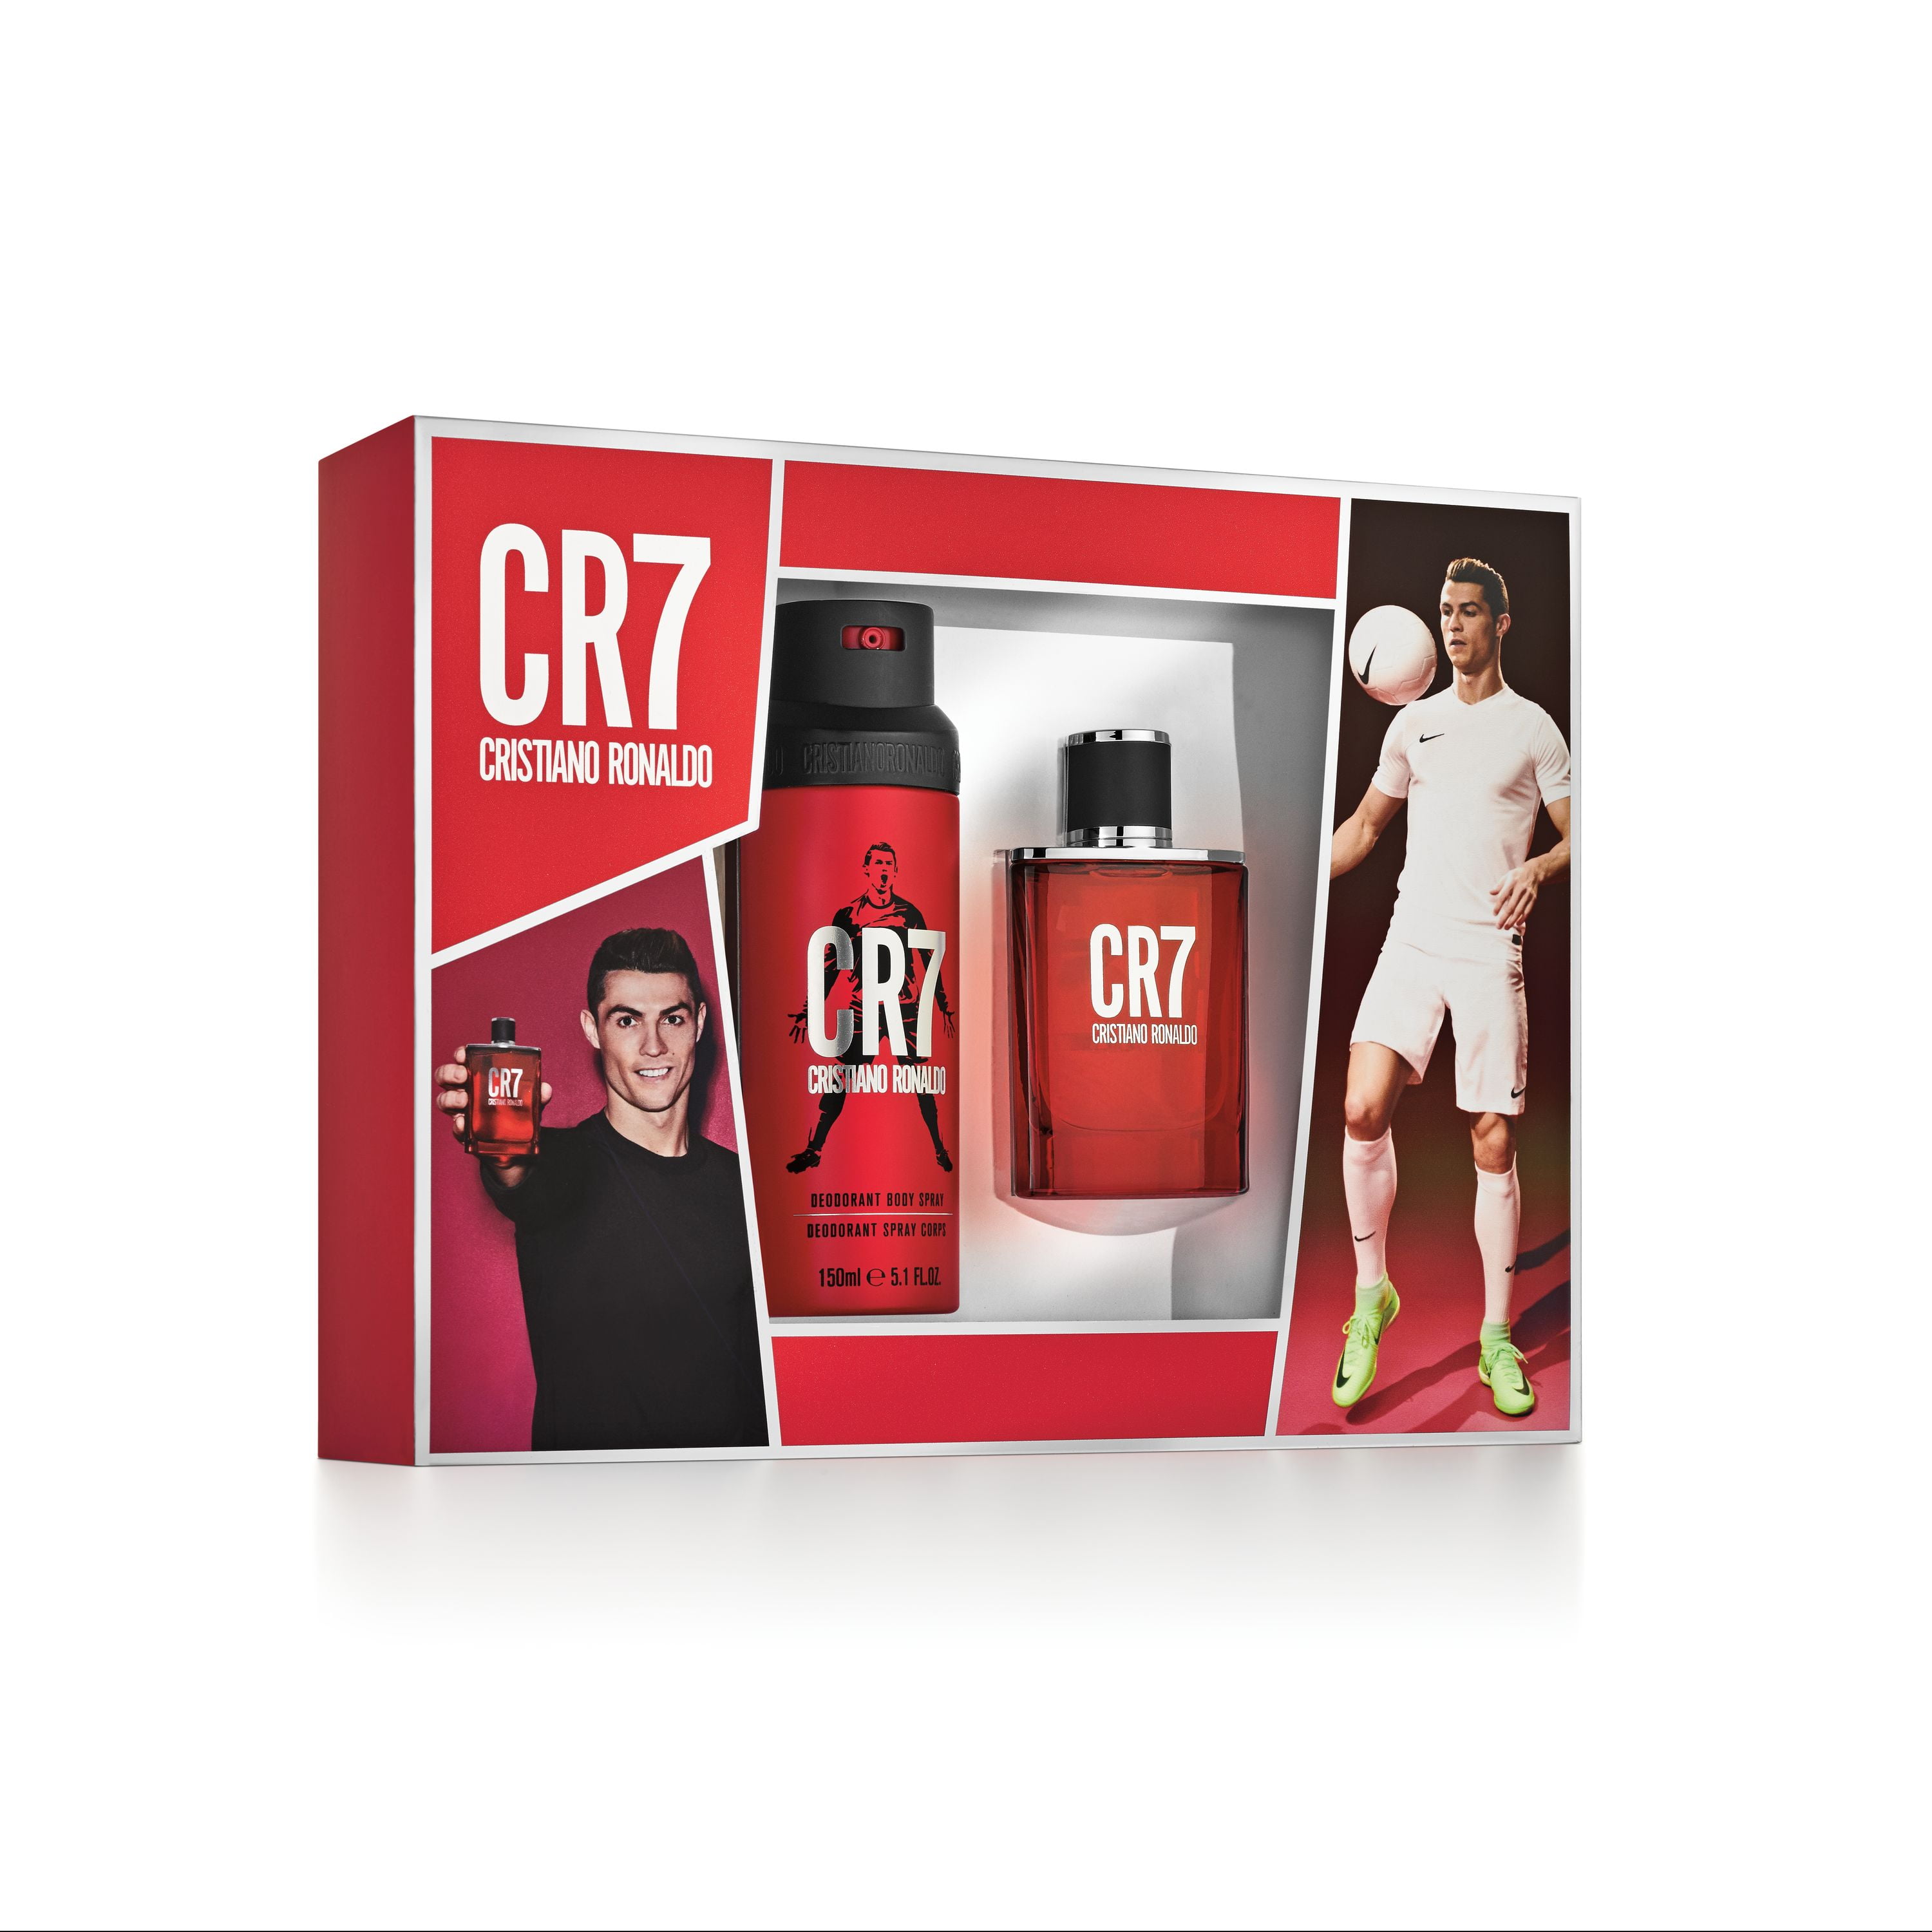 SHOP the CR7 collection from R299, Exclusive to Fashion Fusion SA